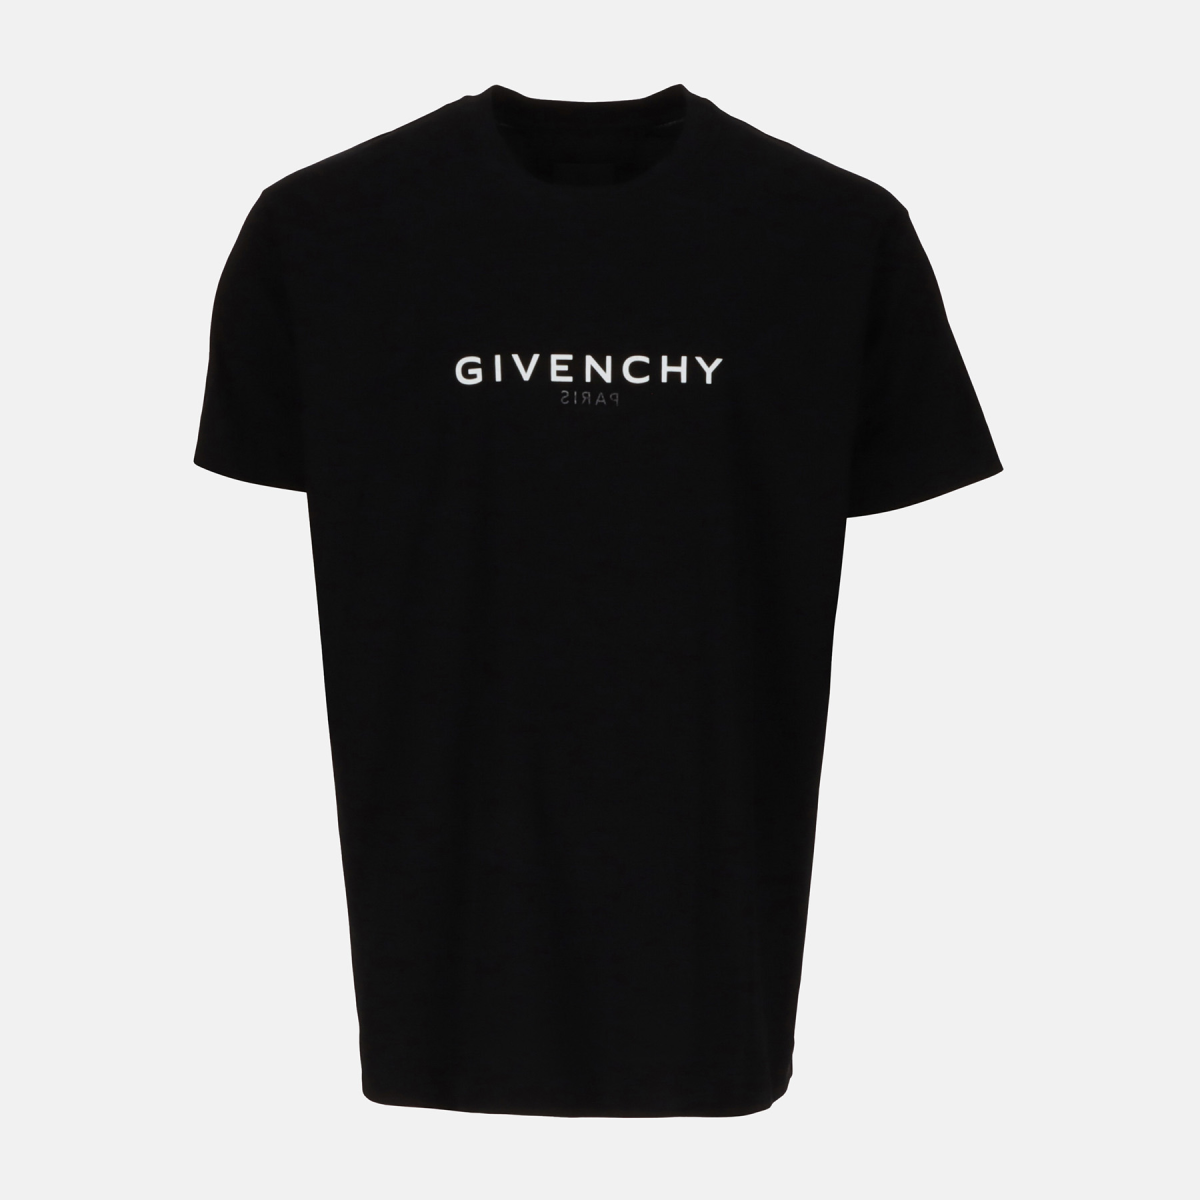 Givenchy Reverse T-shirt